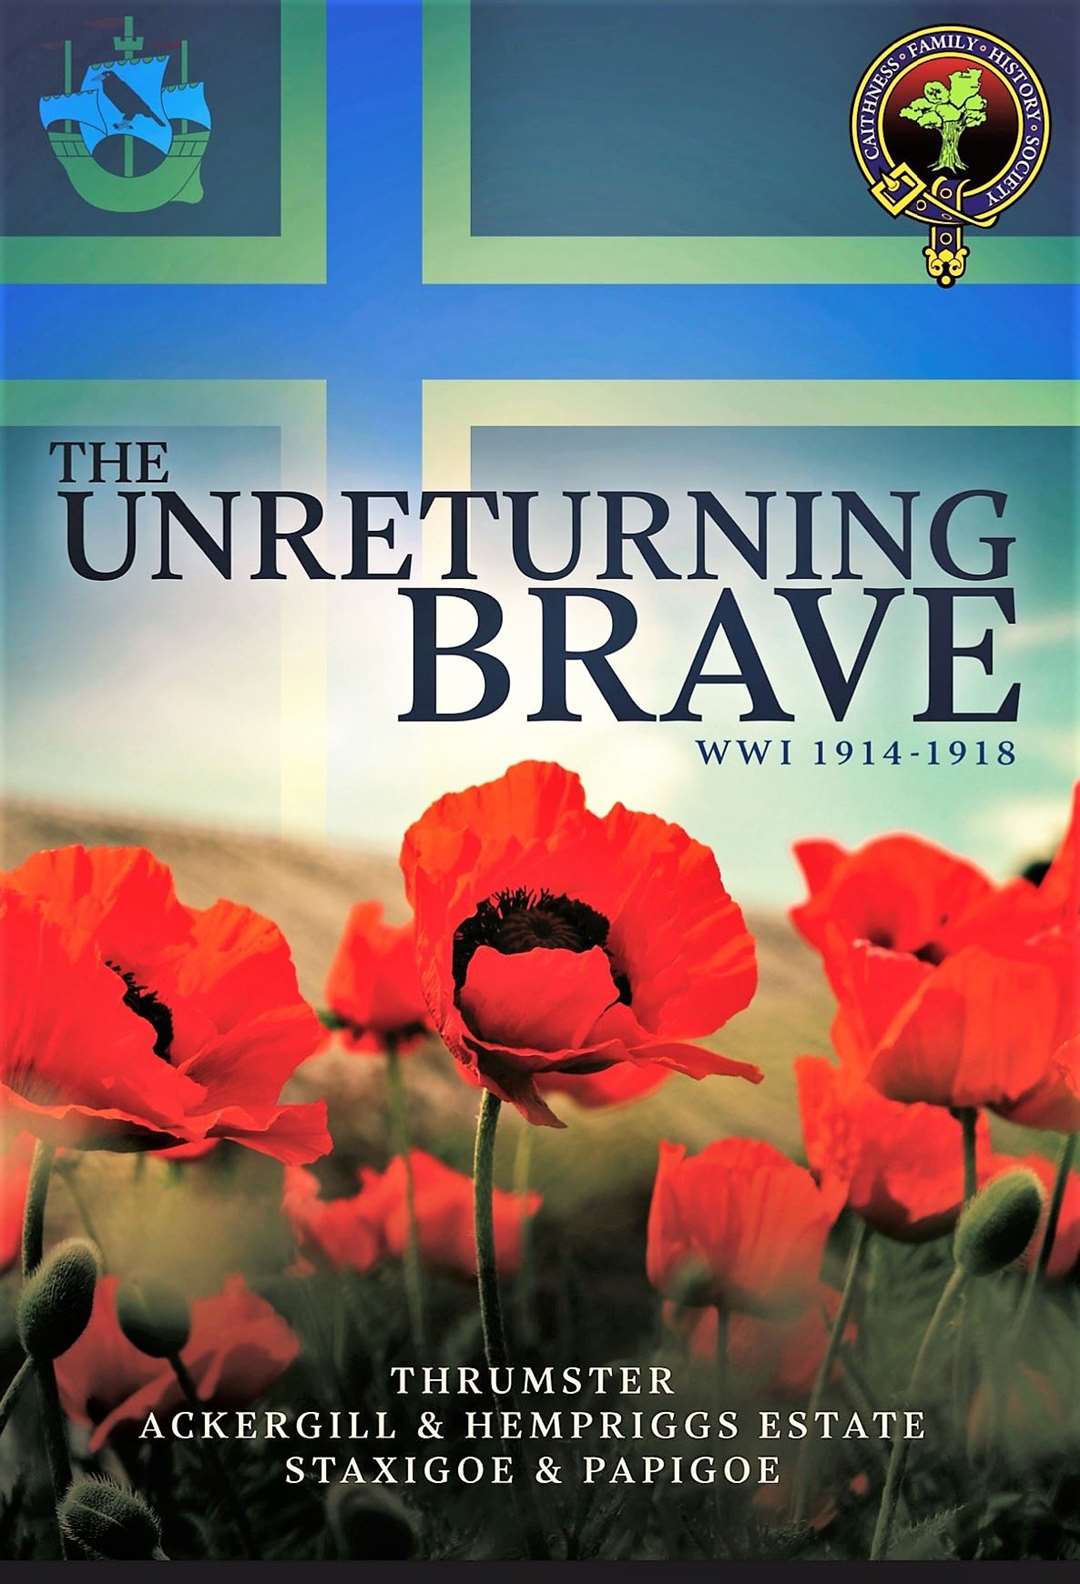 The Unreturning Brave book.